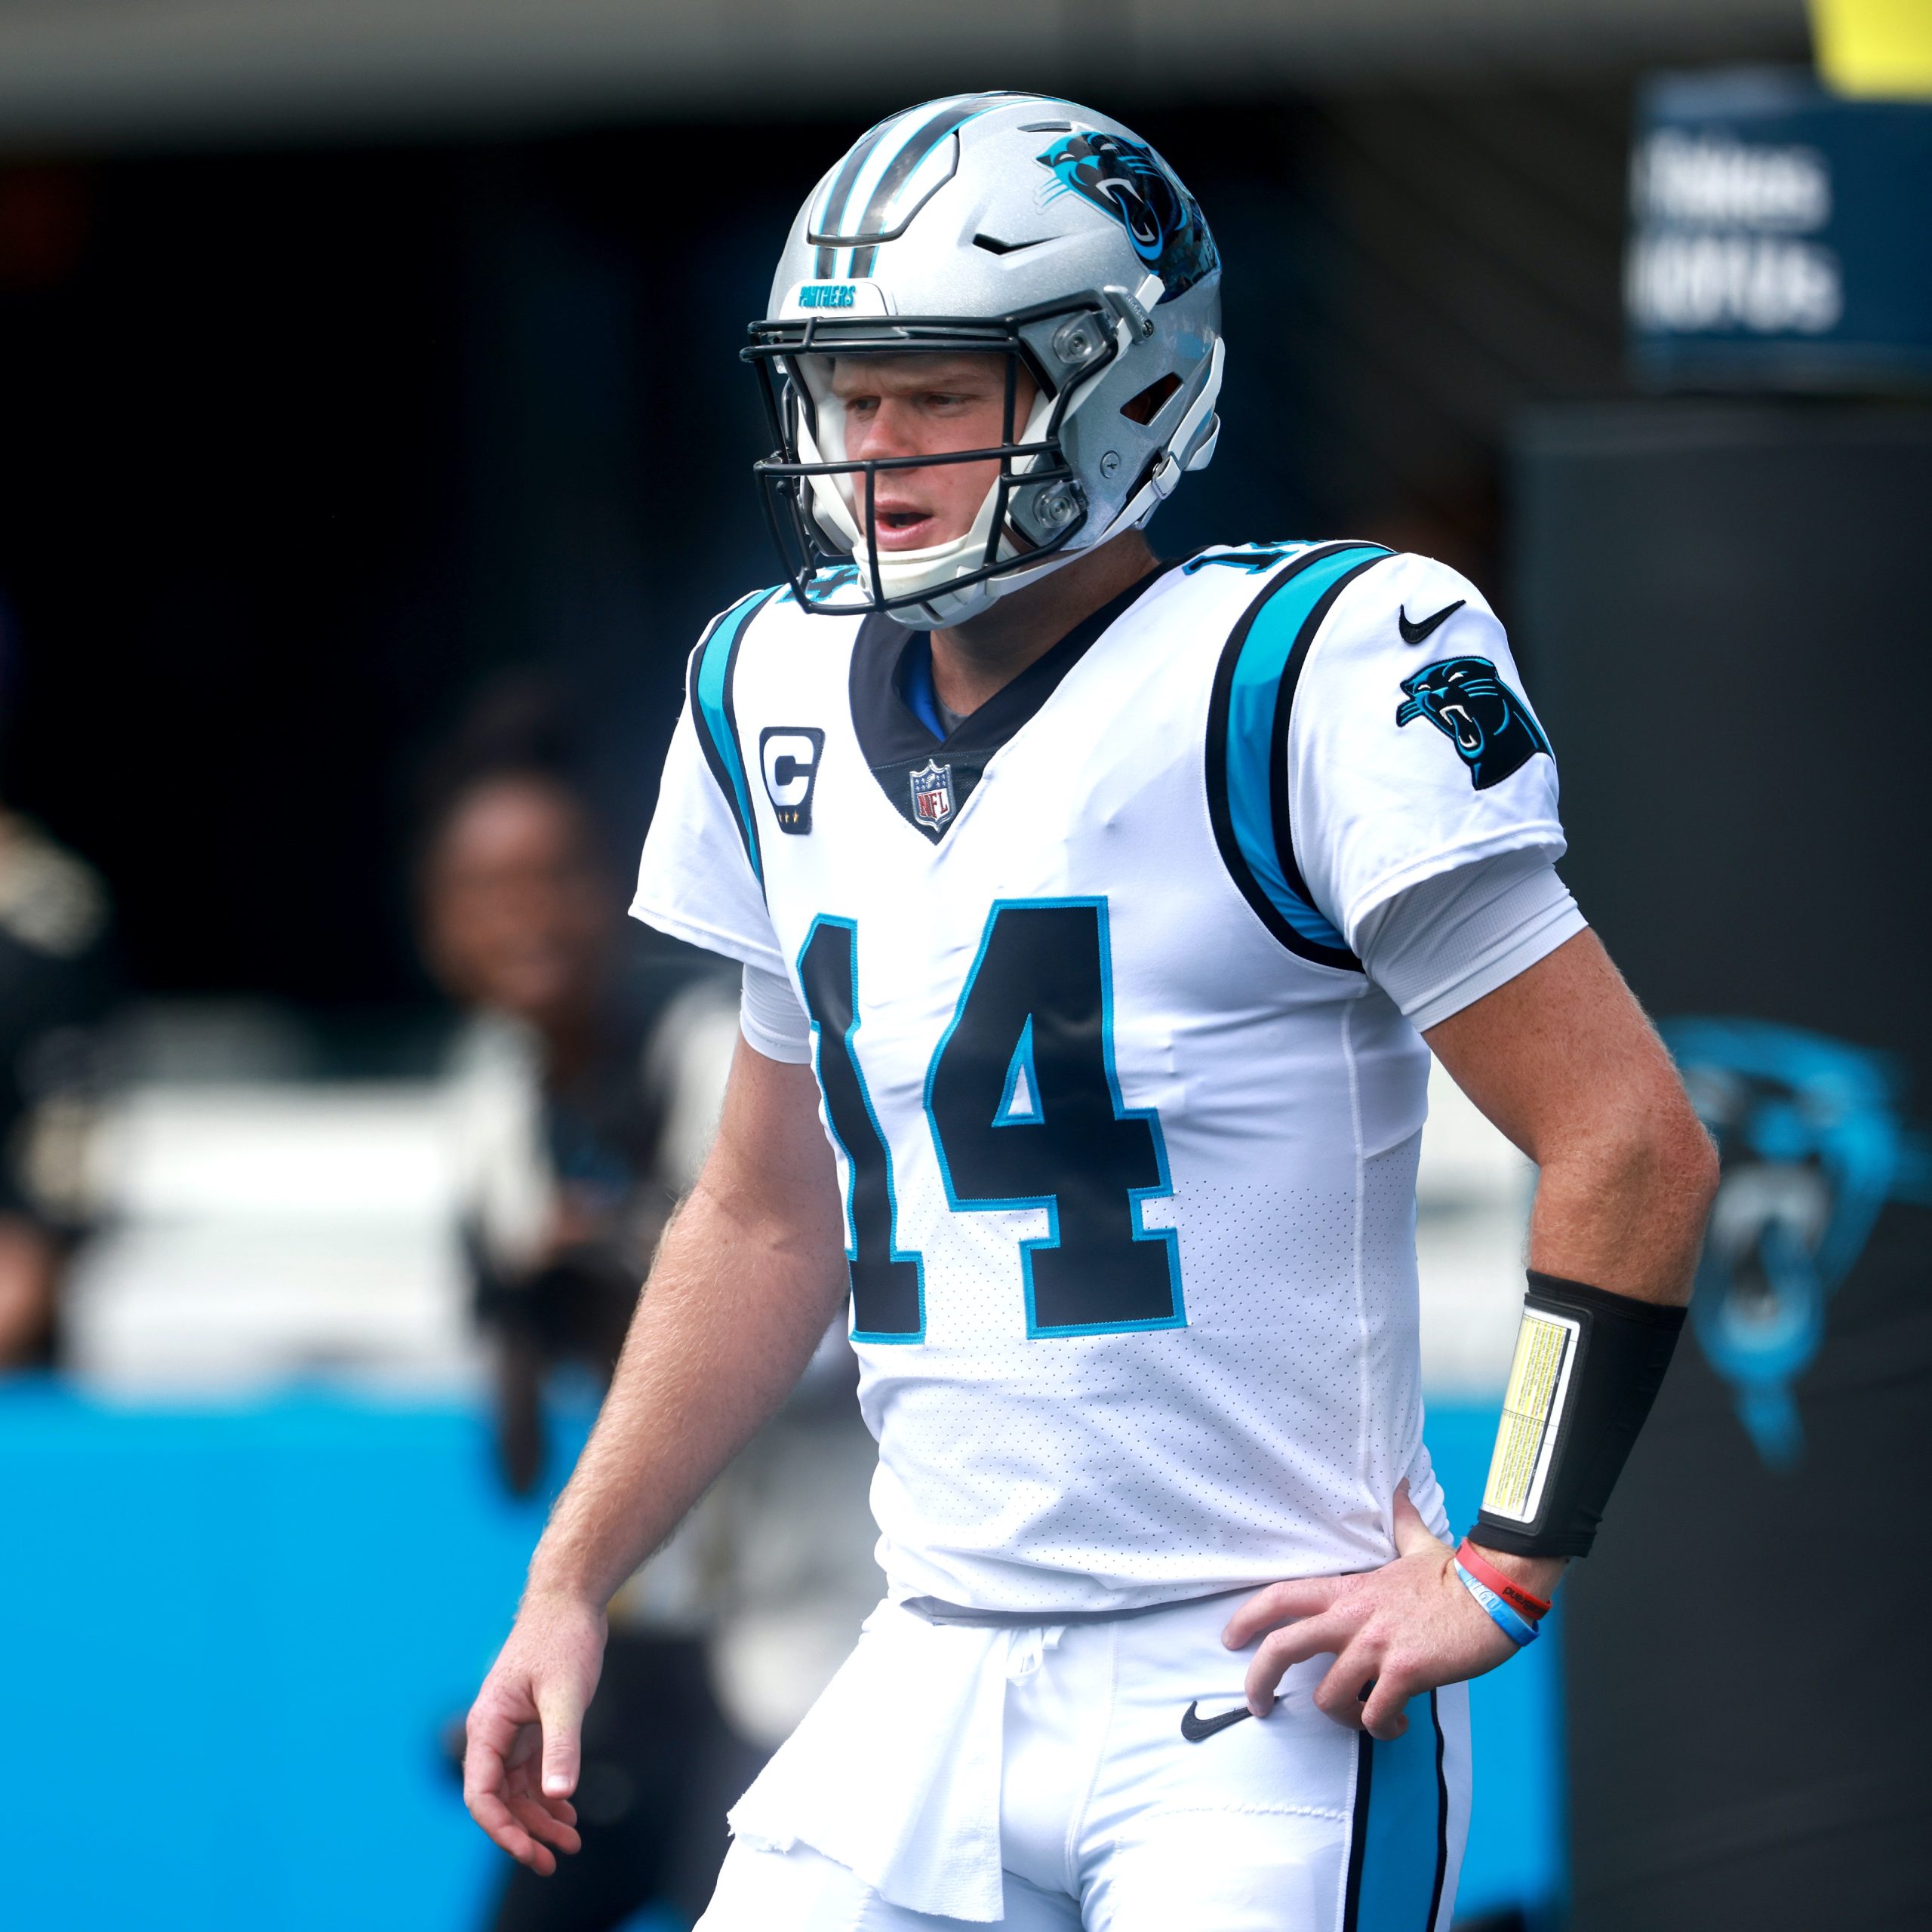 Panthers trade up, draft Mississippi QB Corral in 3rd round